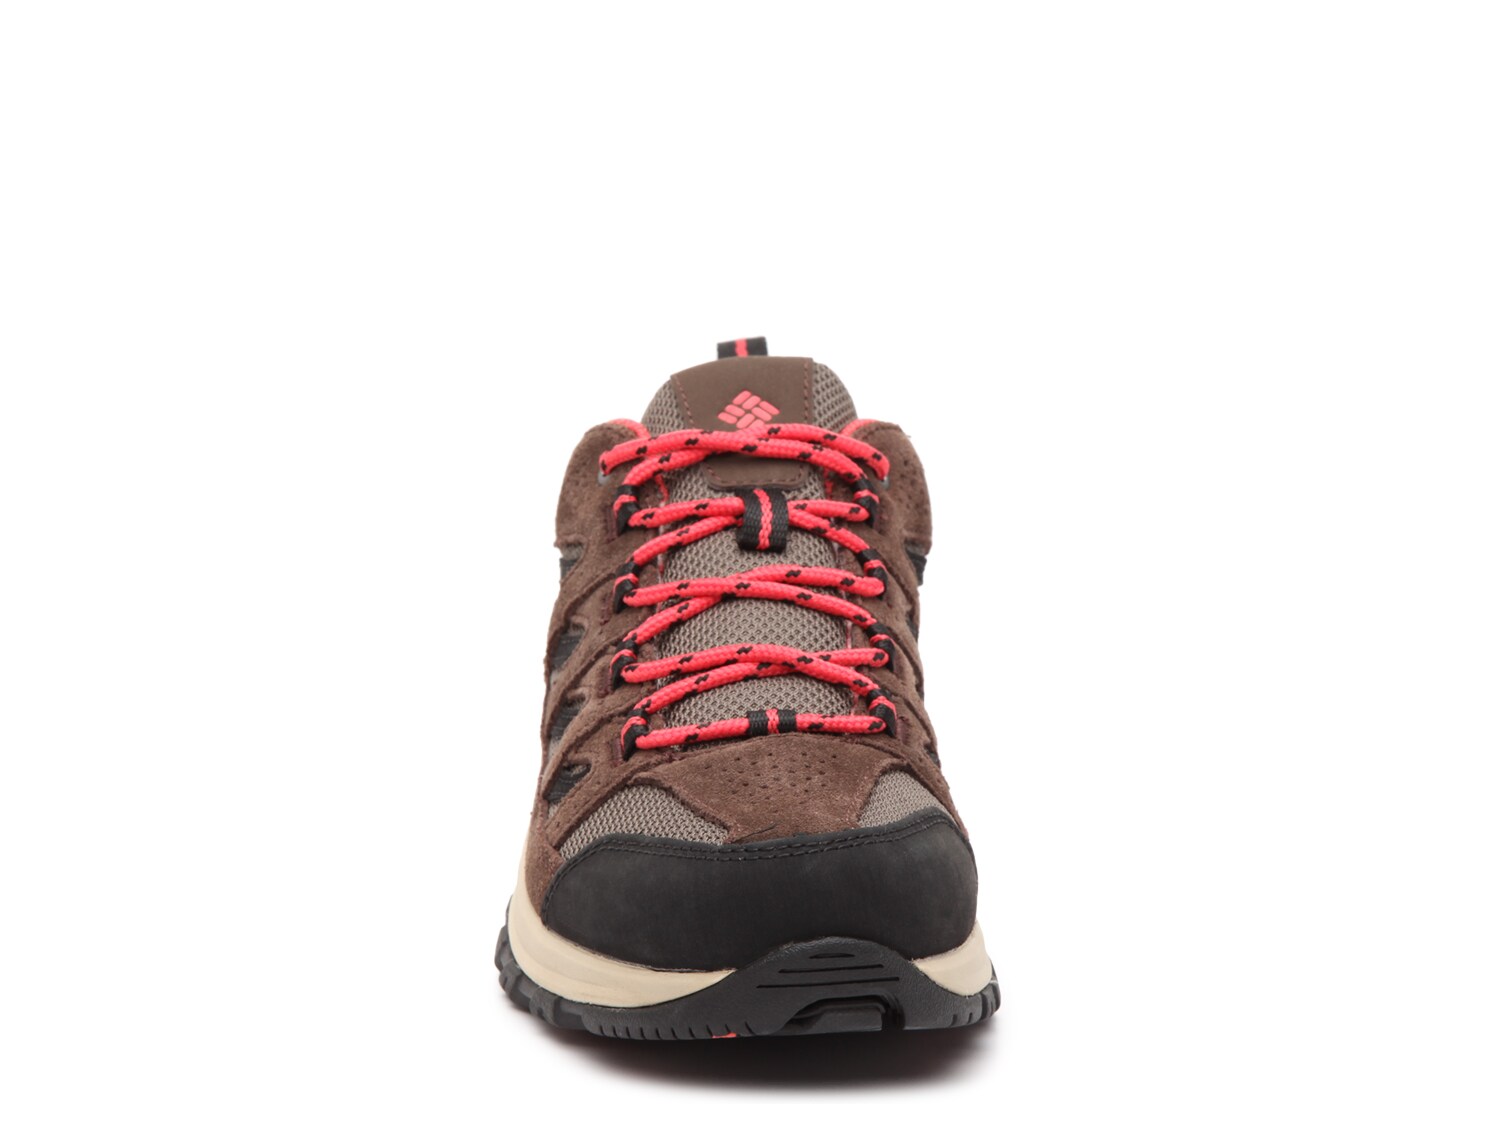 Dsw Hiking Shoes Online, 60% OFF | lagence.tv